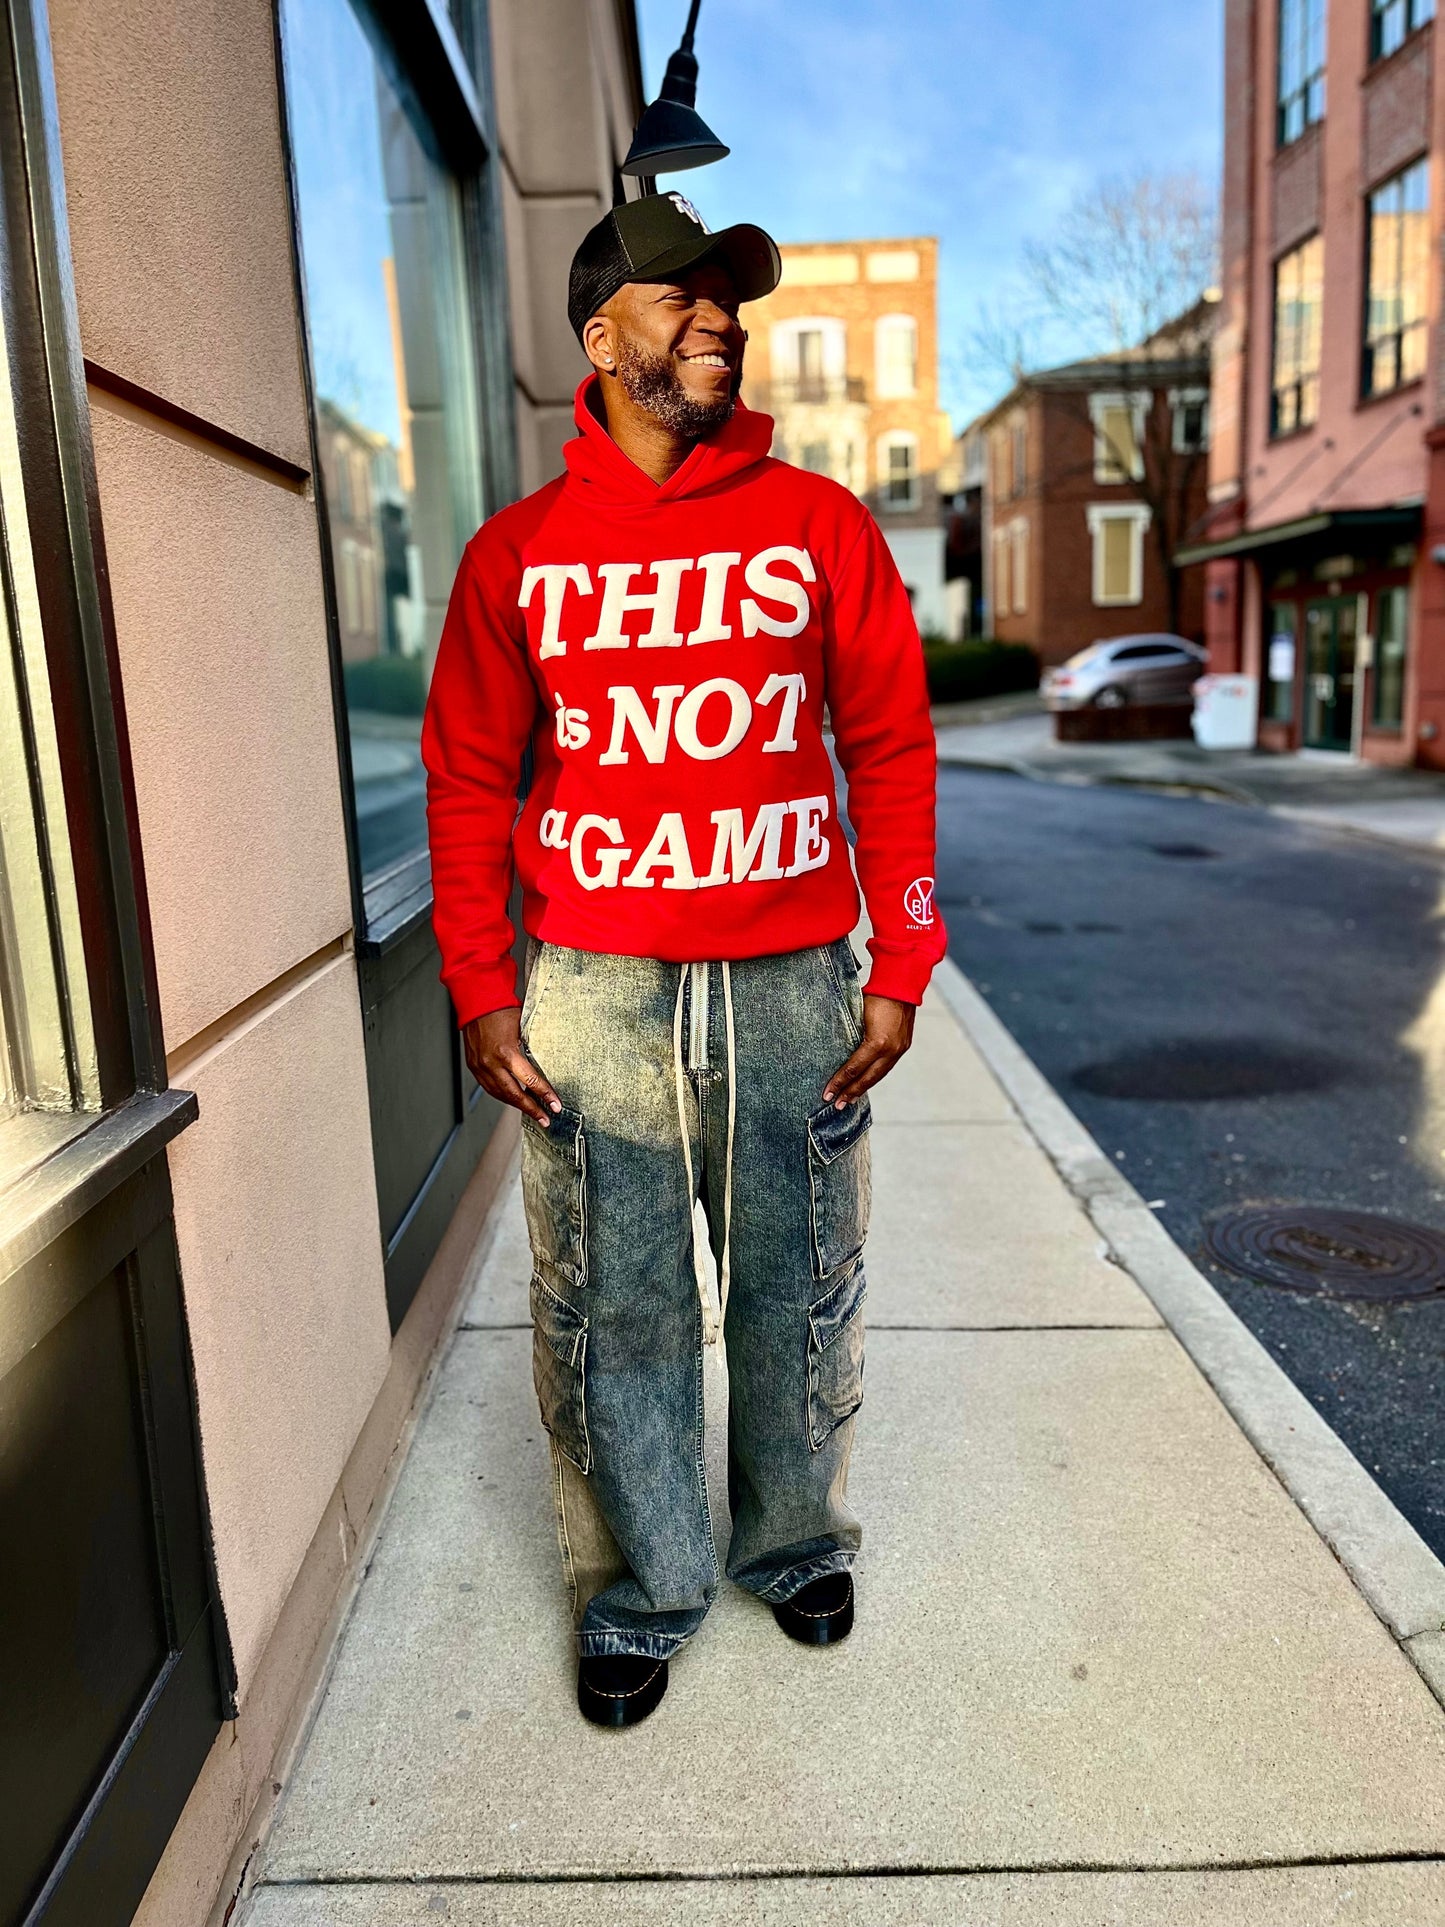 "This Is Not A Game" Hoodie (Red)